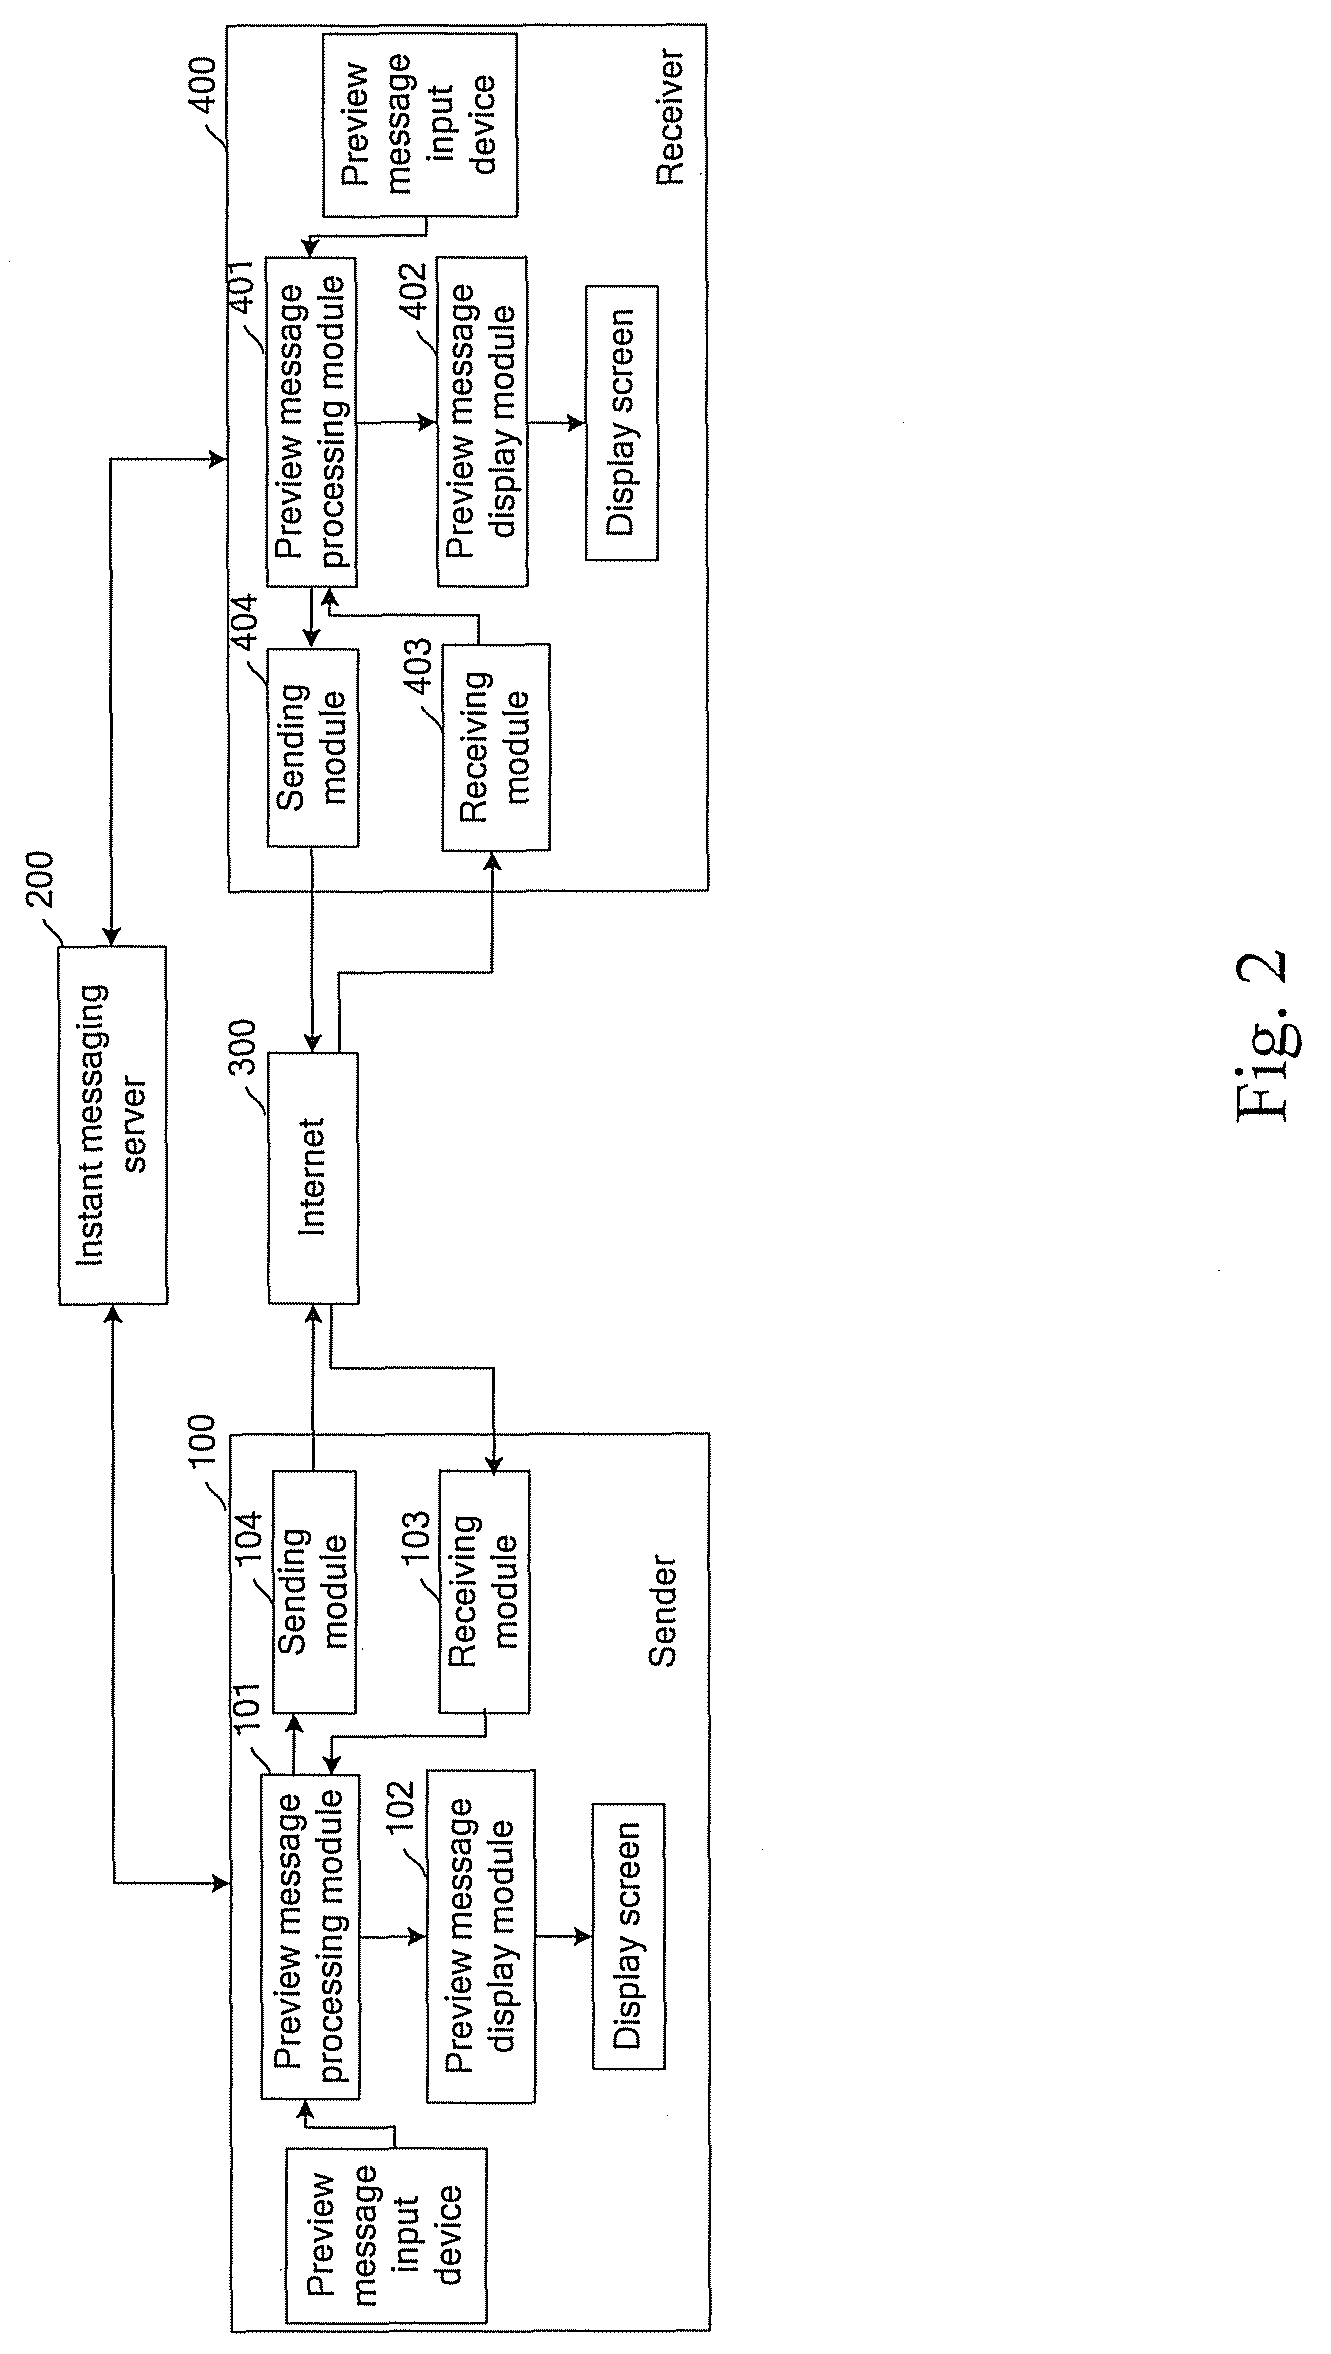 Method, system and client for transmitting preview message in instant messaging system